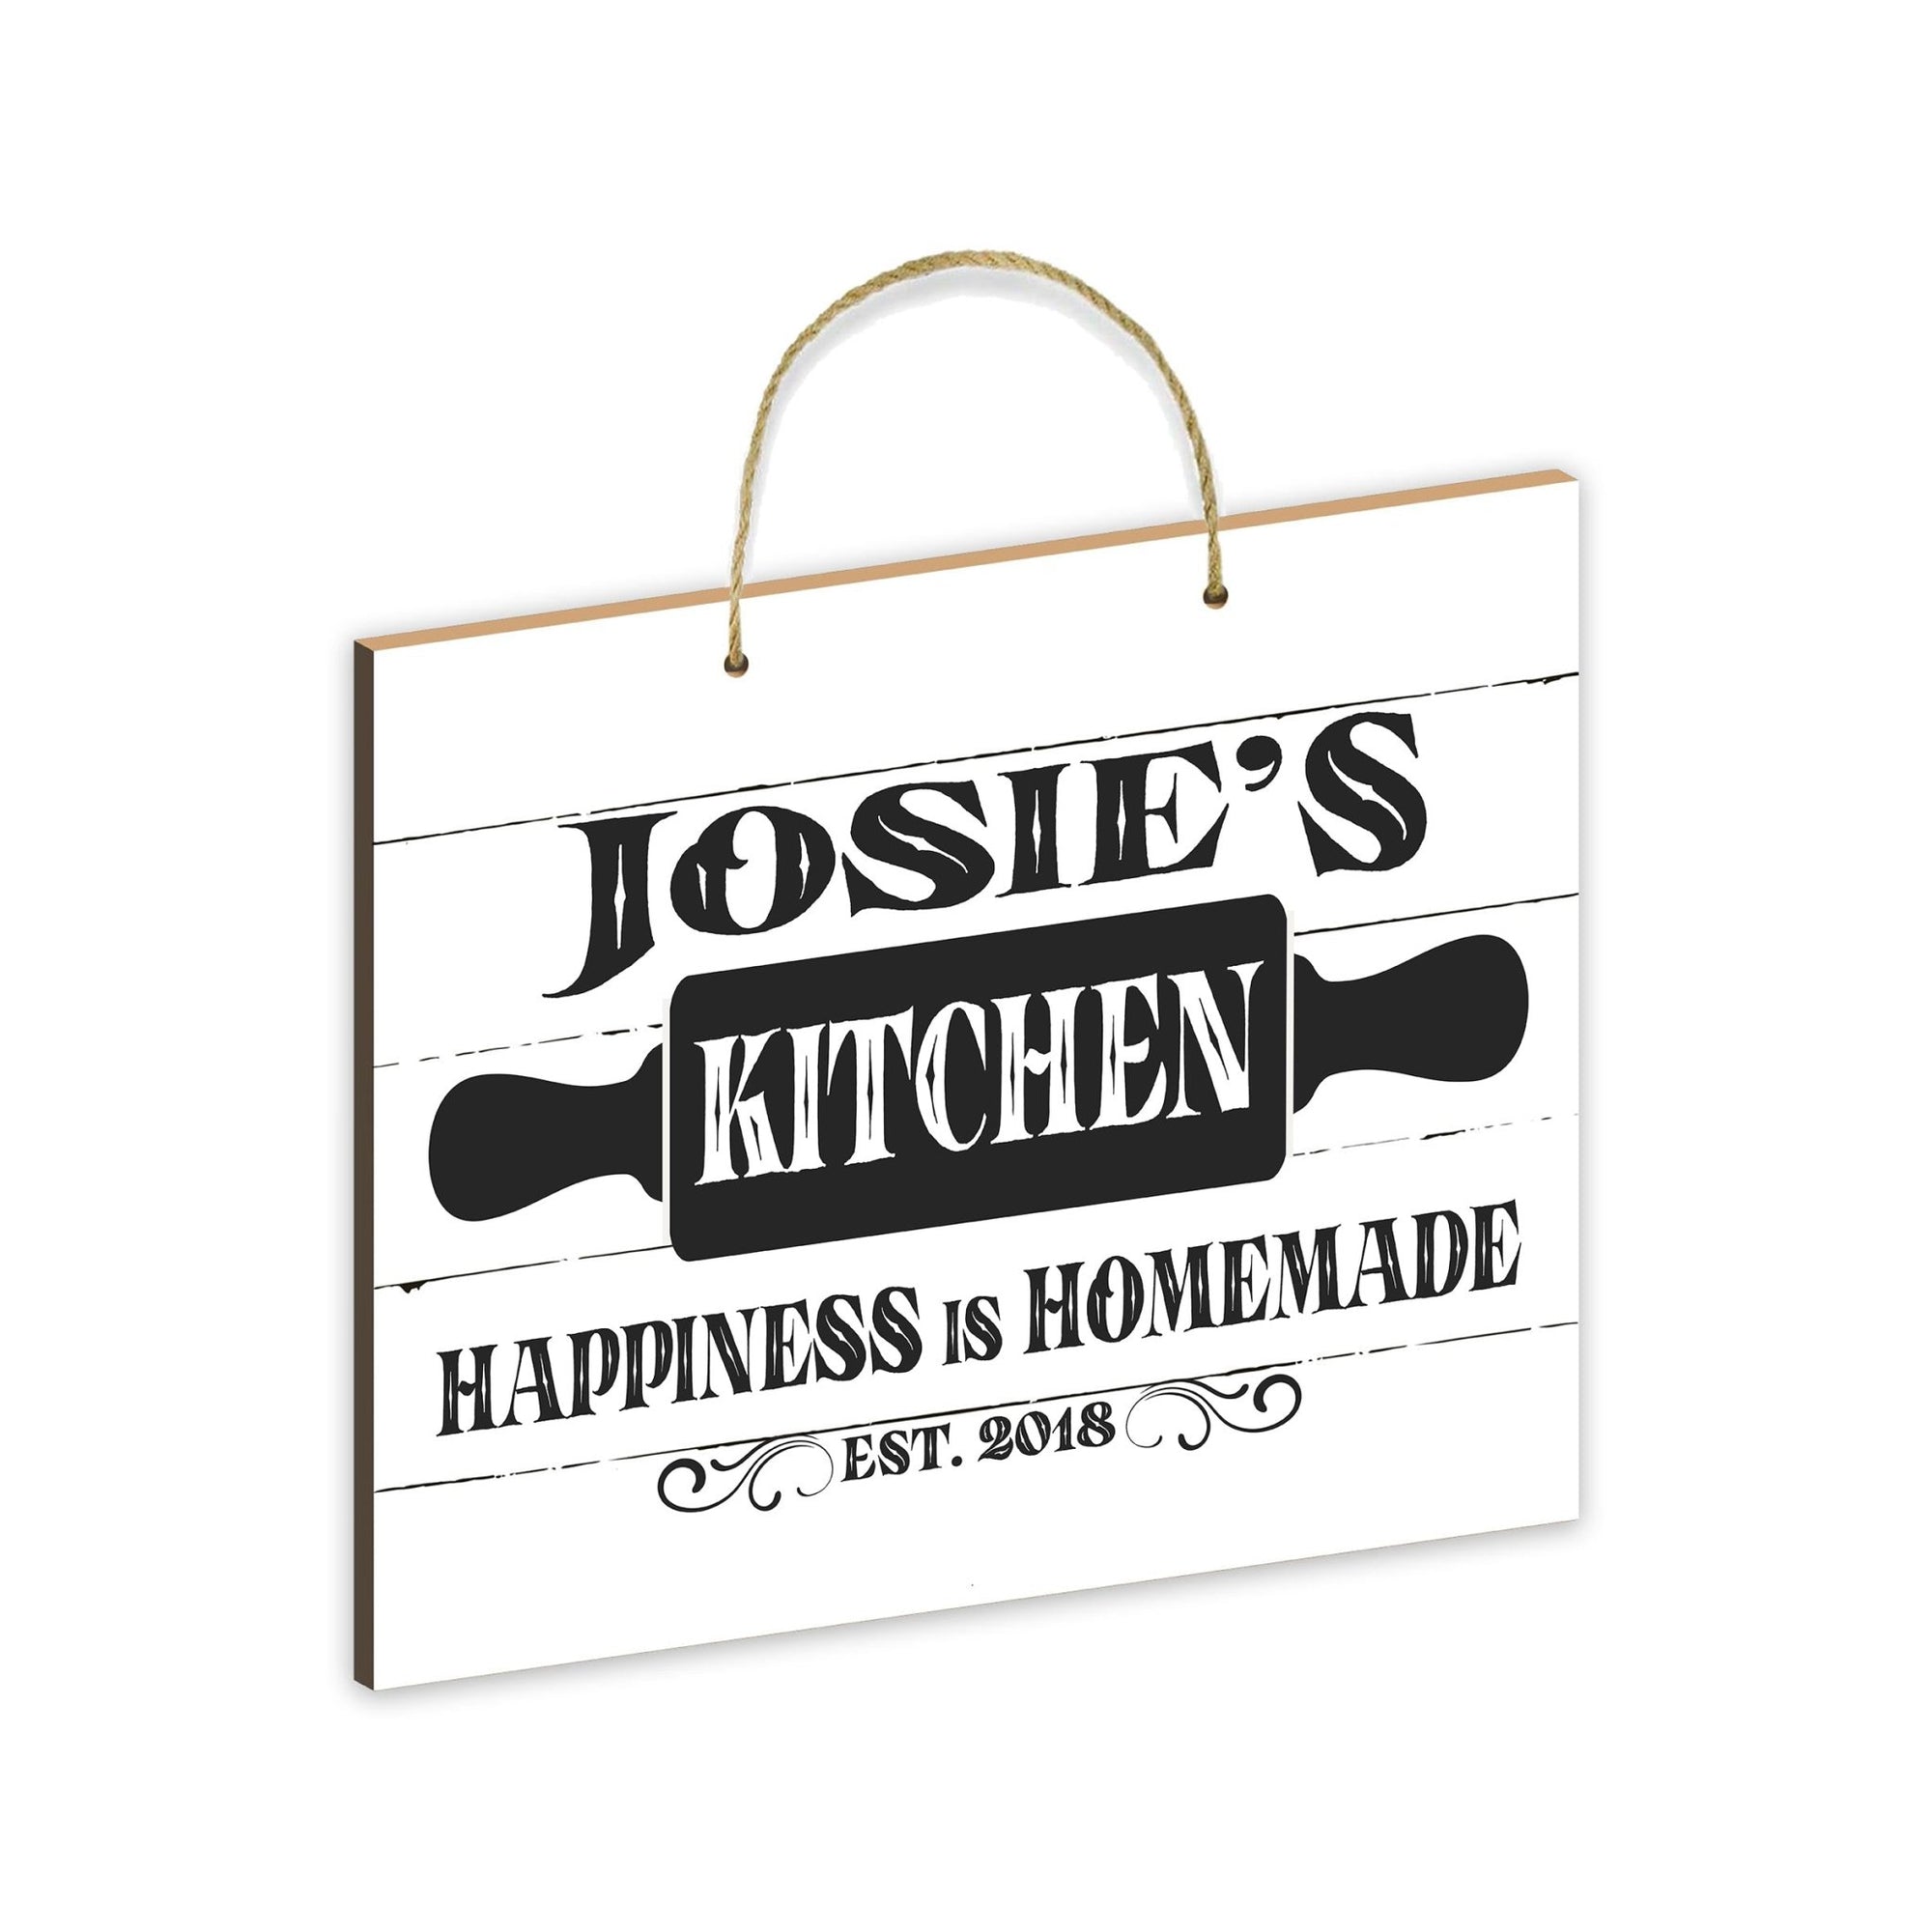 Inspirational Wooden Rustic Wall Hanging Rope Sign Kitchen Home Décor - Happiness Is Homemade - LifeSong Milestones